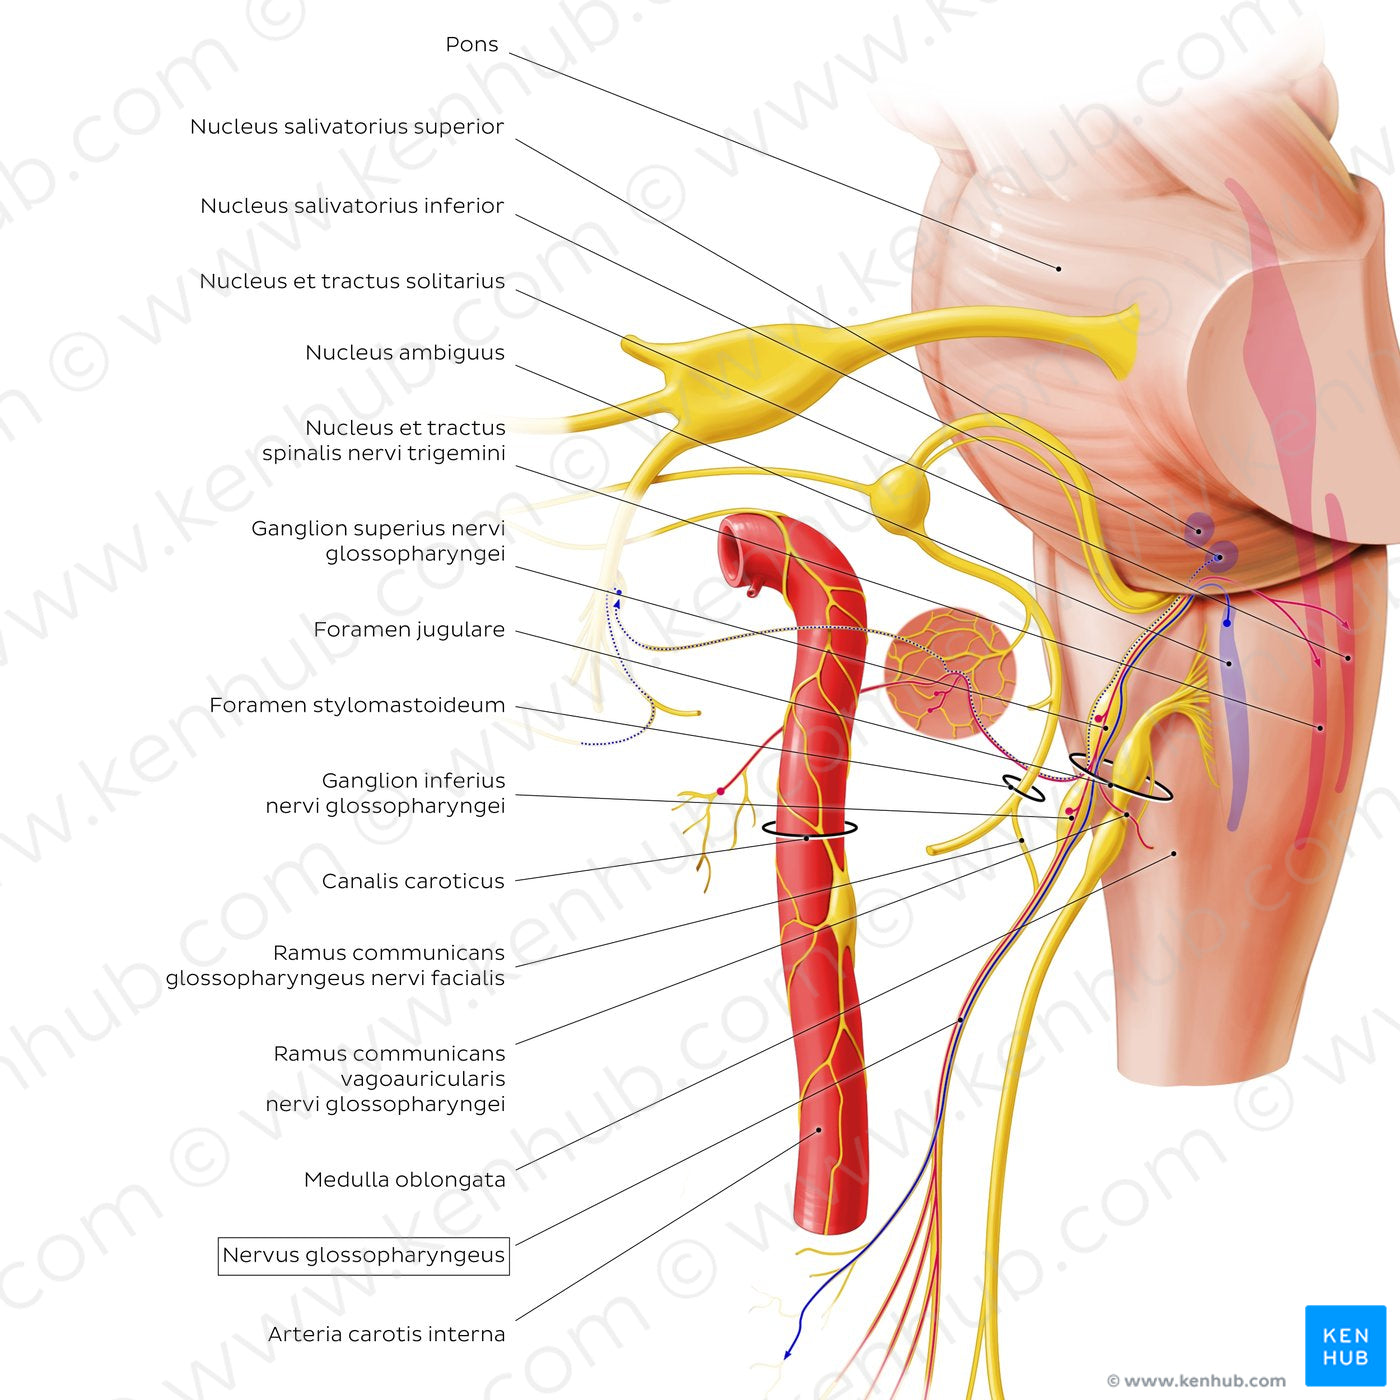 Glossopharyngeal nerve (origin and proximal branches) (Latin)